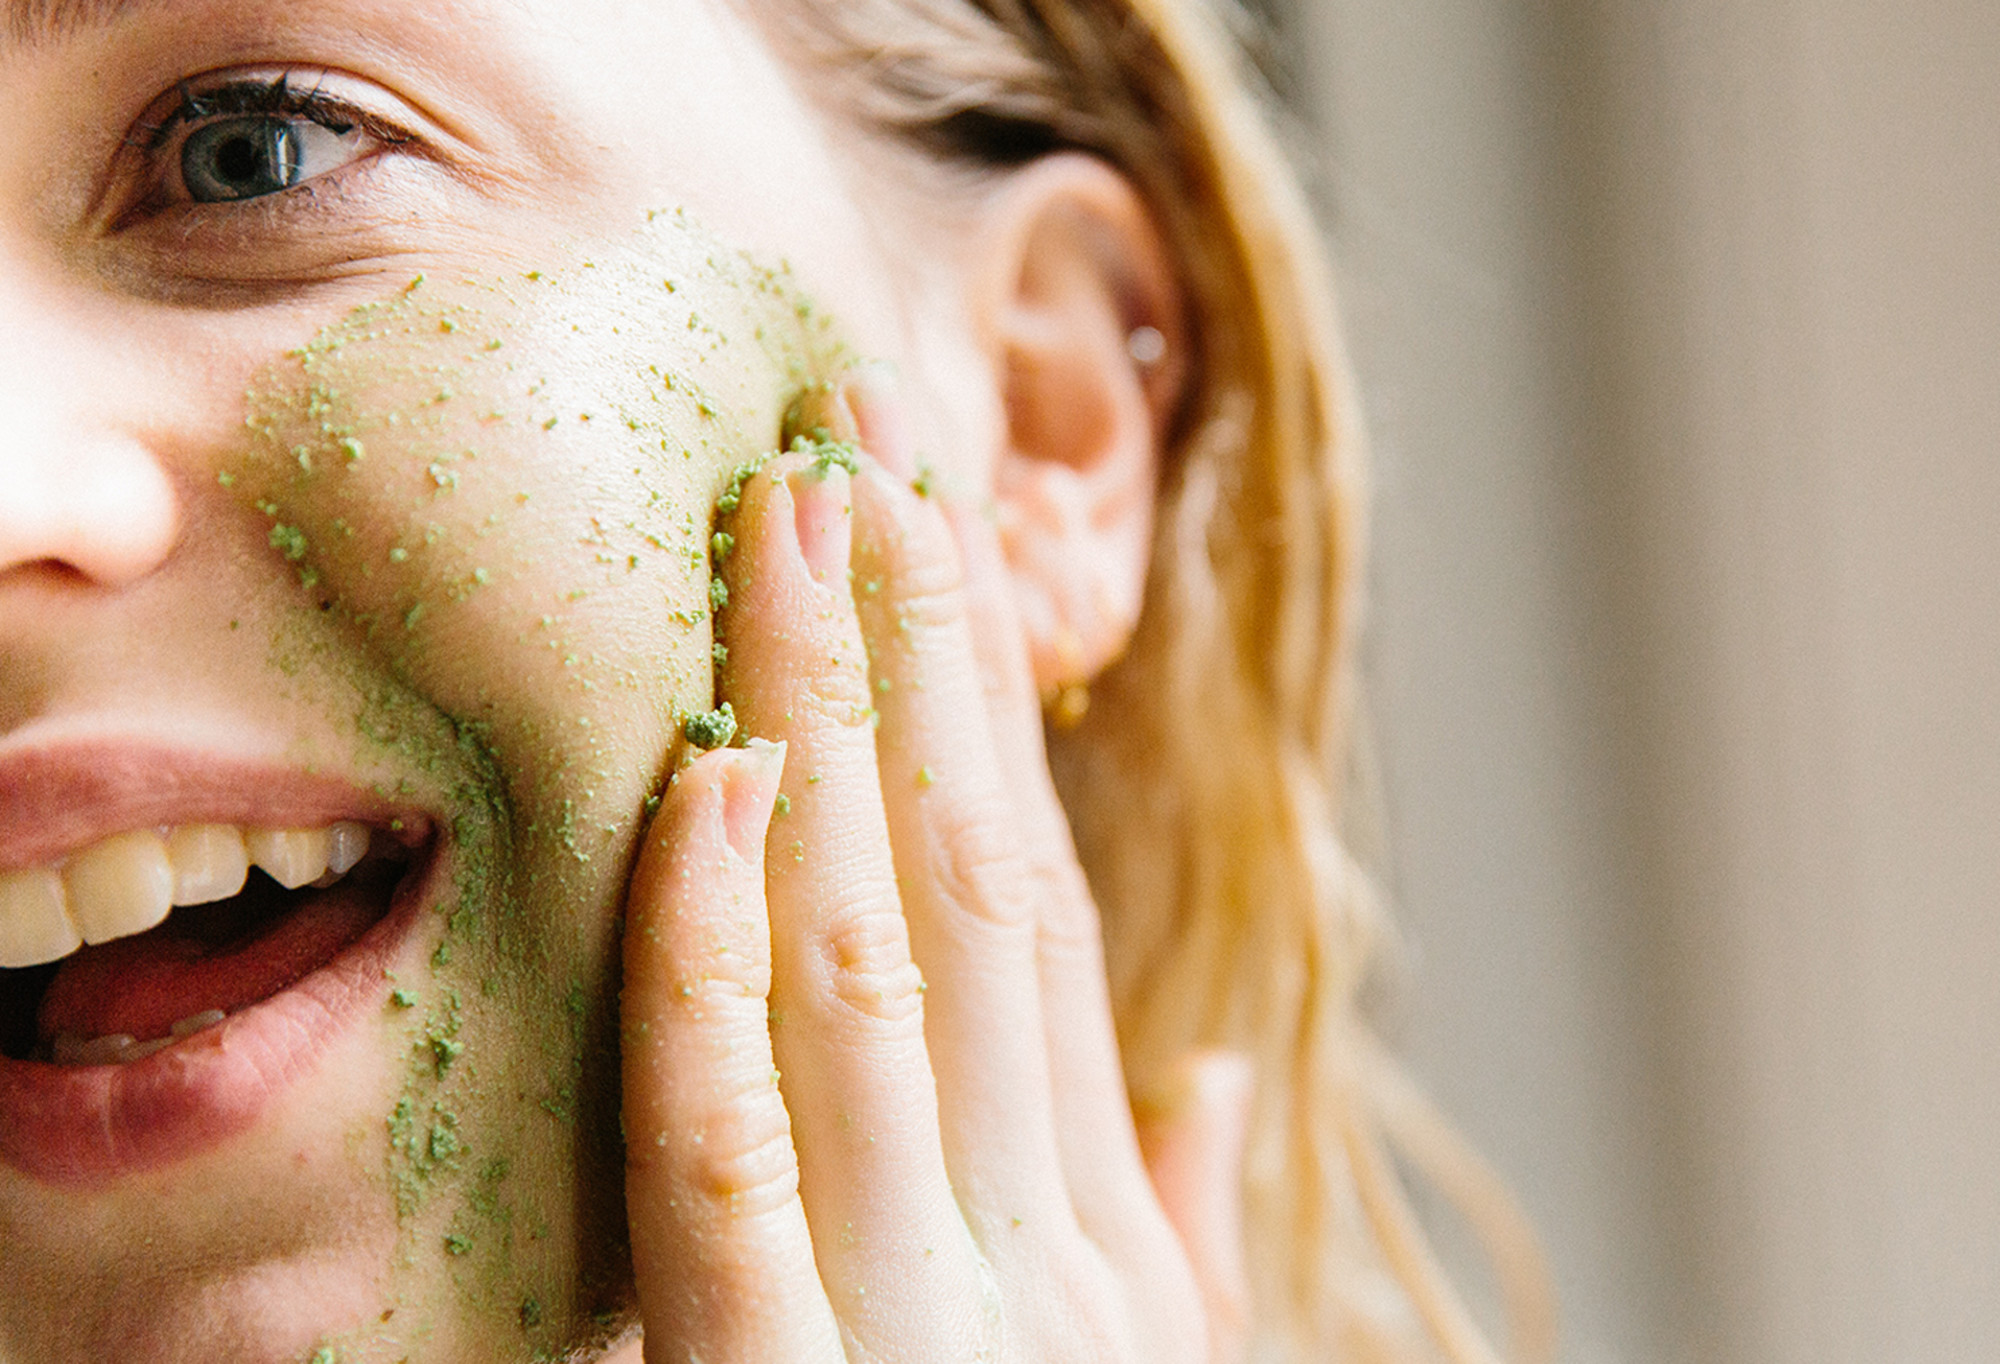 A smiling face massages Herbalism - a vibrant green, textured, fresh cleanser, made into a paste - into their cheeks.